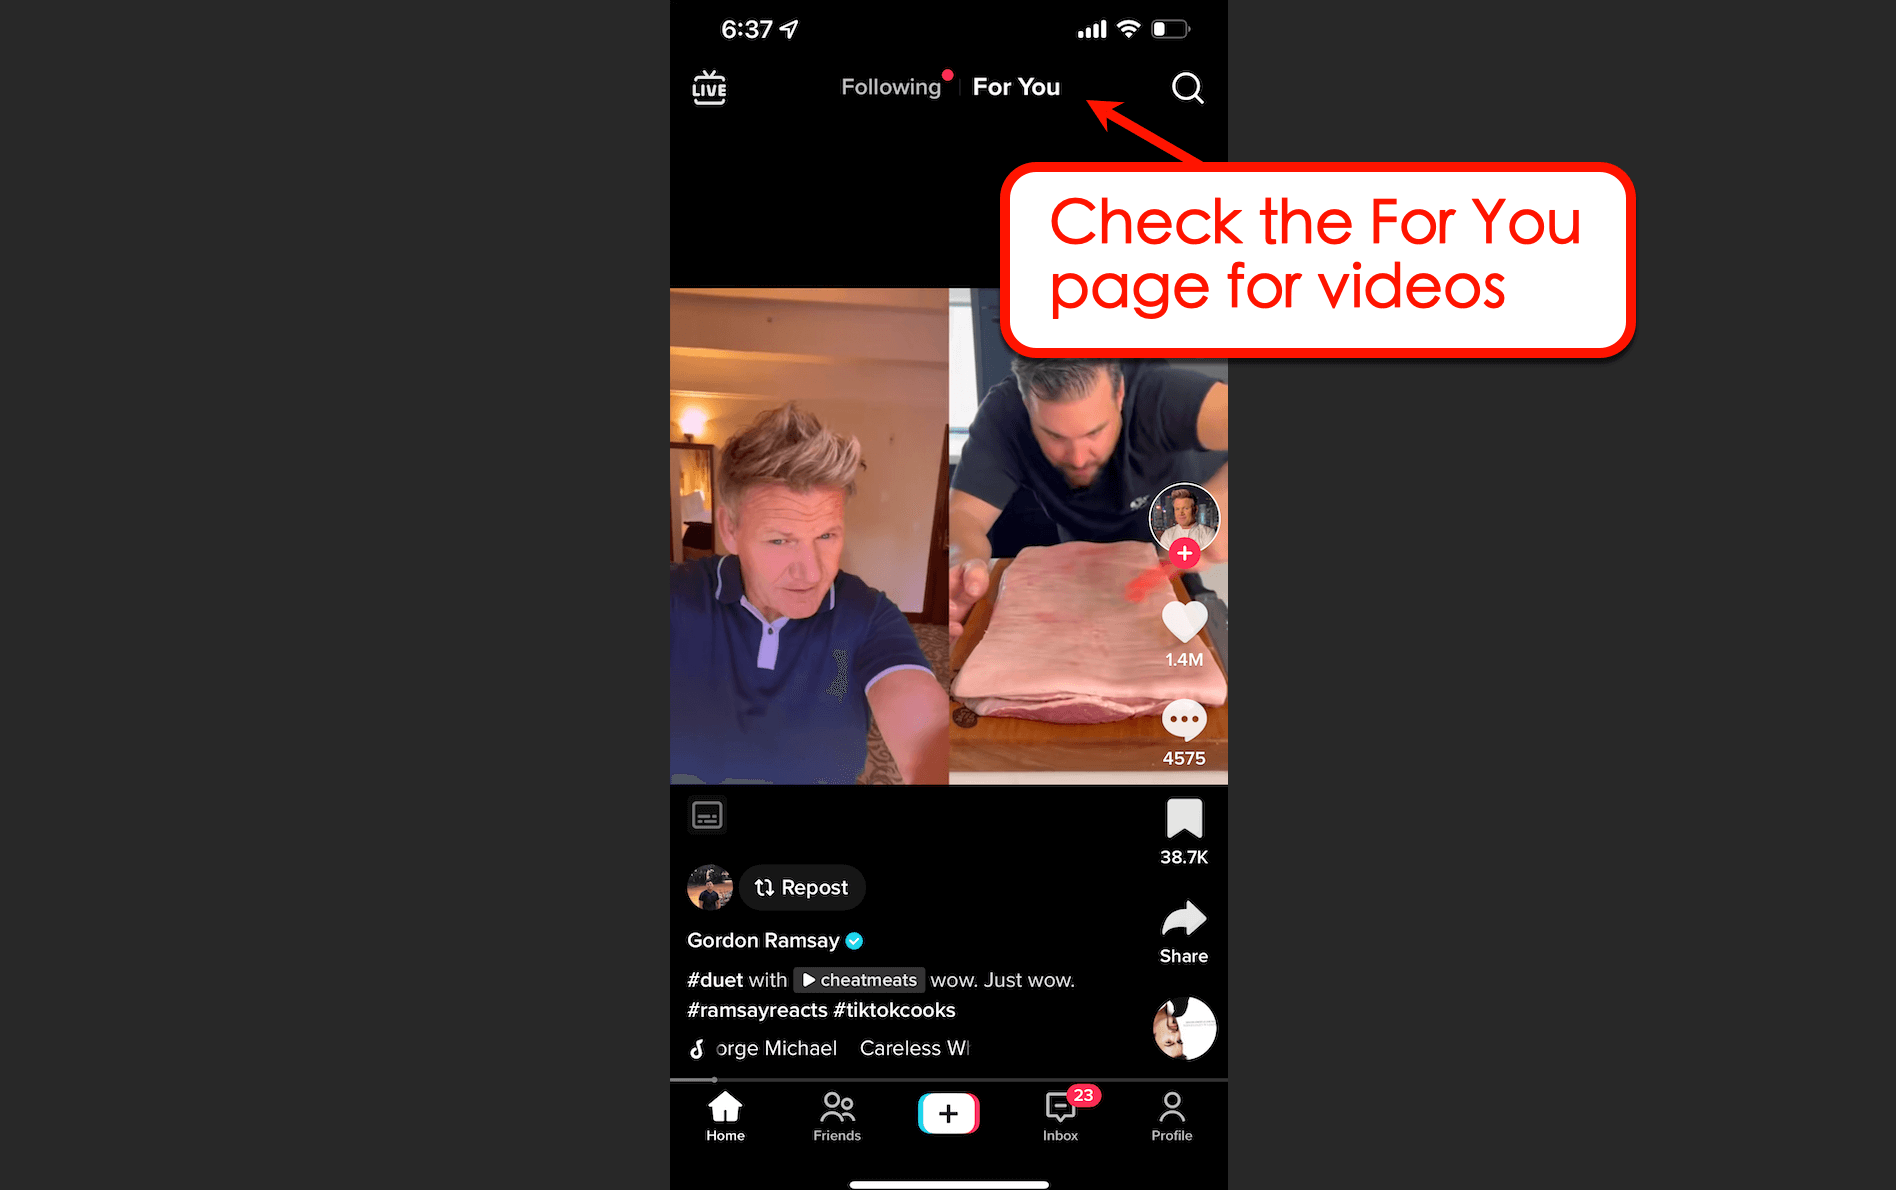 Screenshot of TikTok's For You page for videos